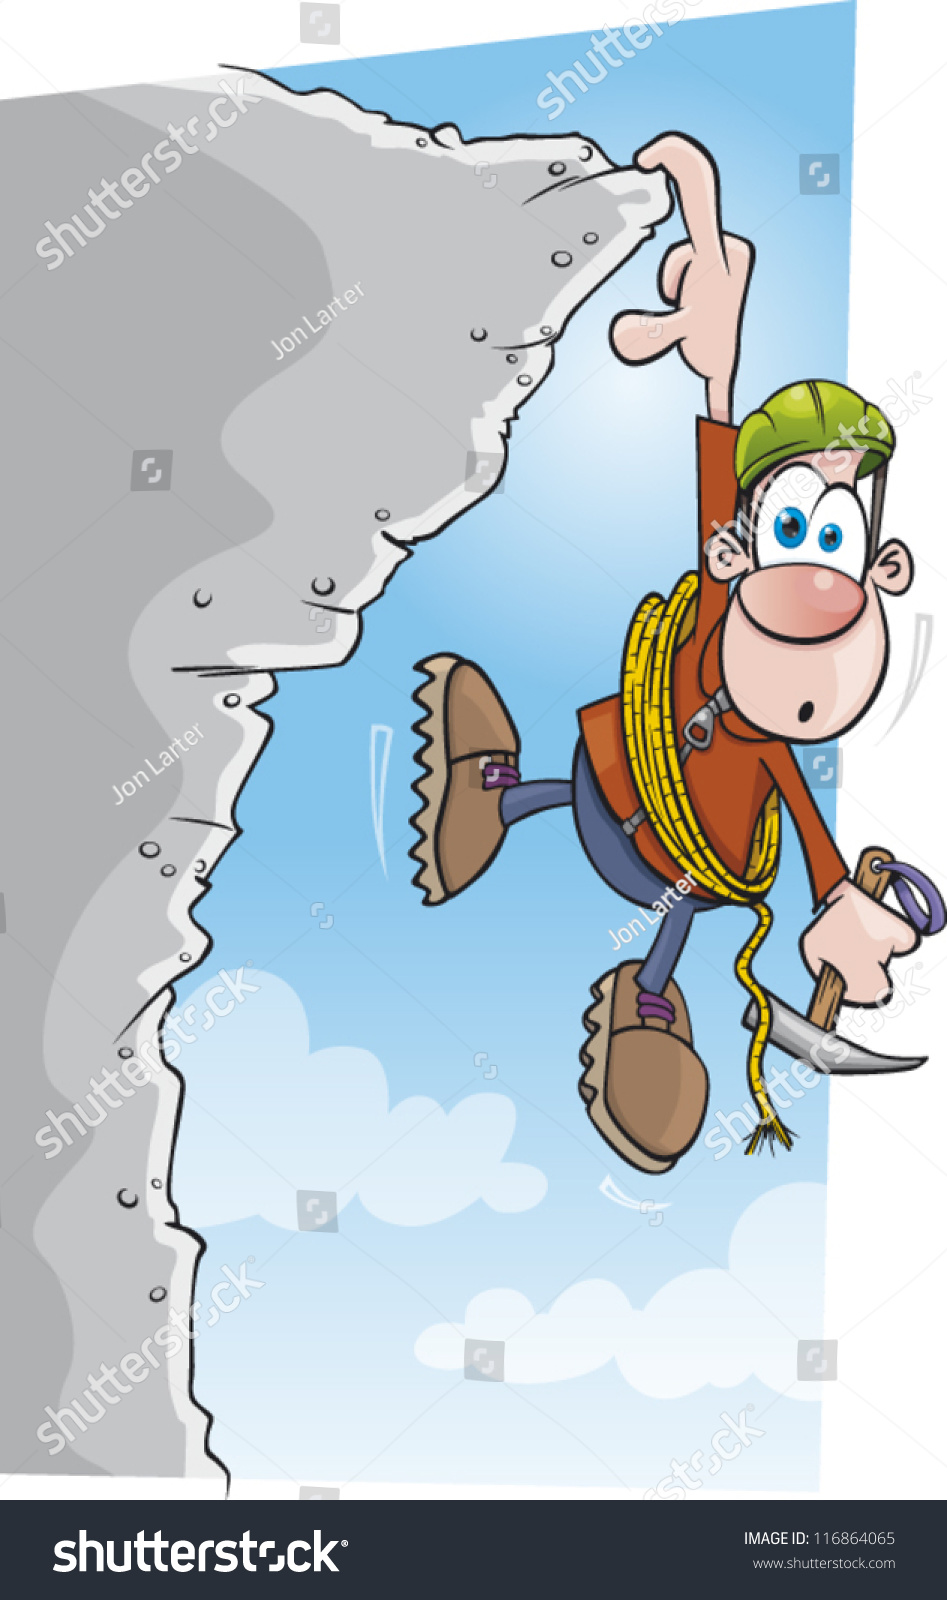 A Cartoon Climber Is In Trouble Hanging From A Cliff Stock Vector Illustration 116864065